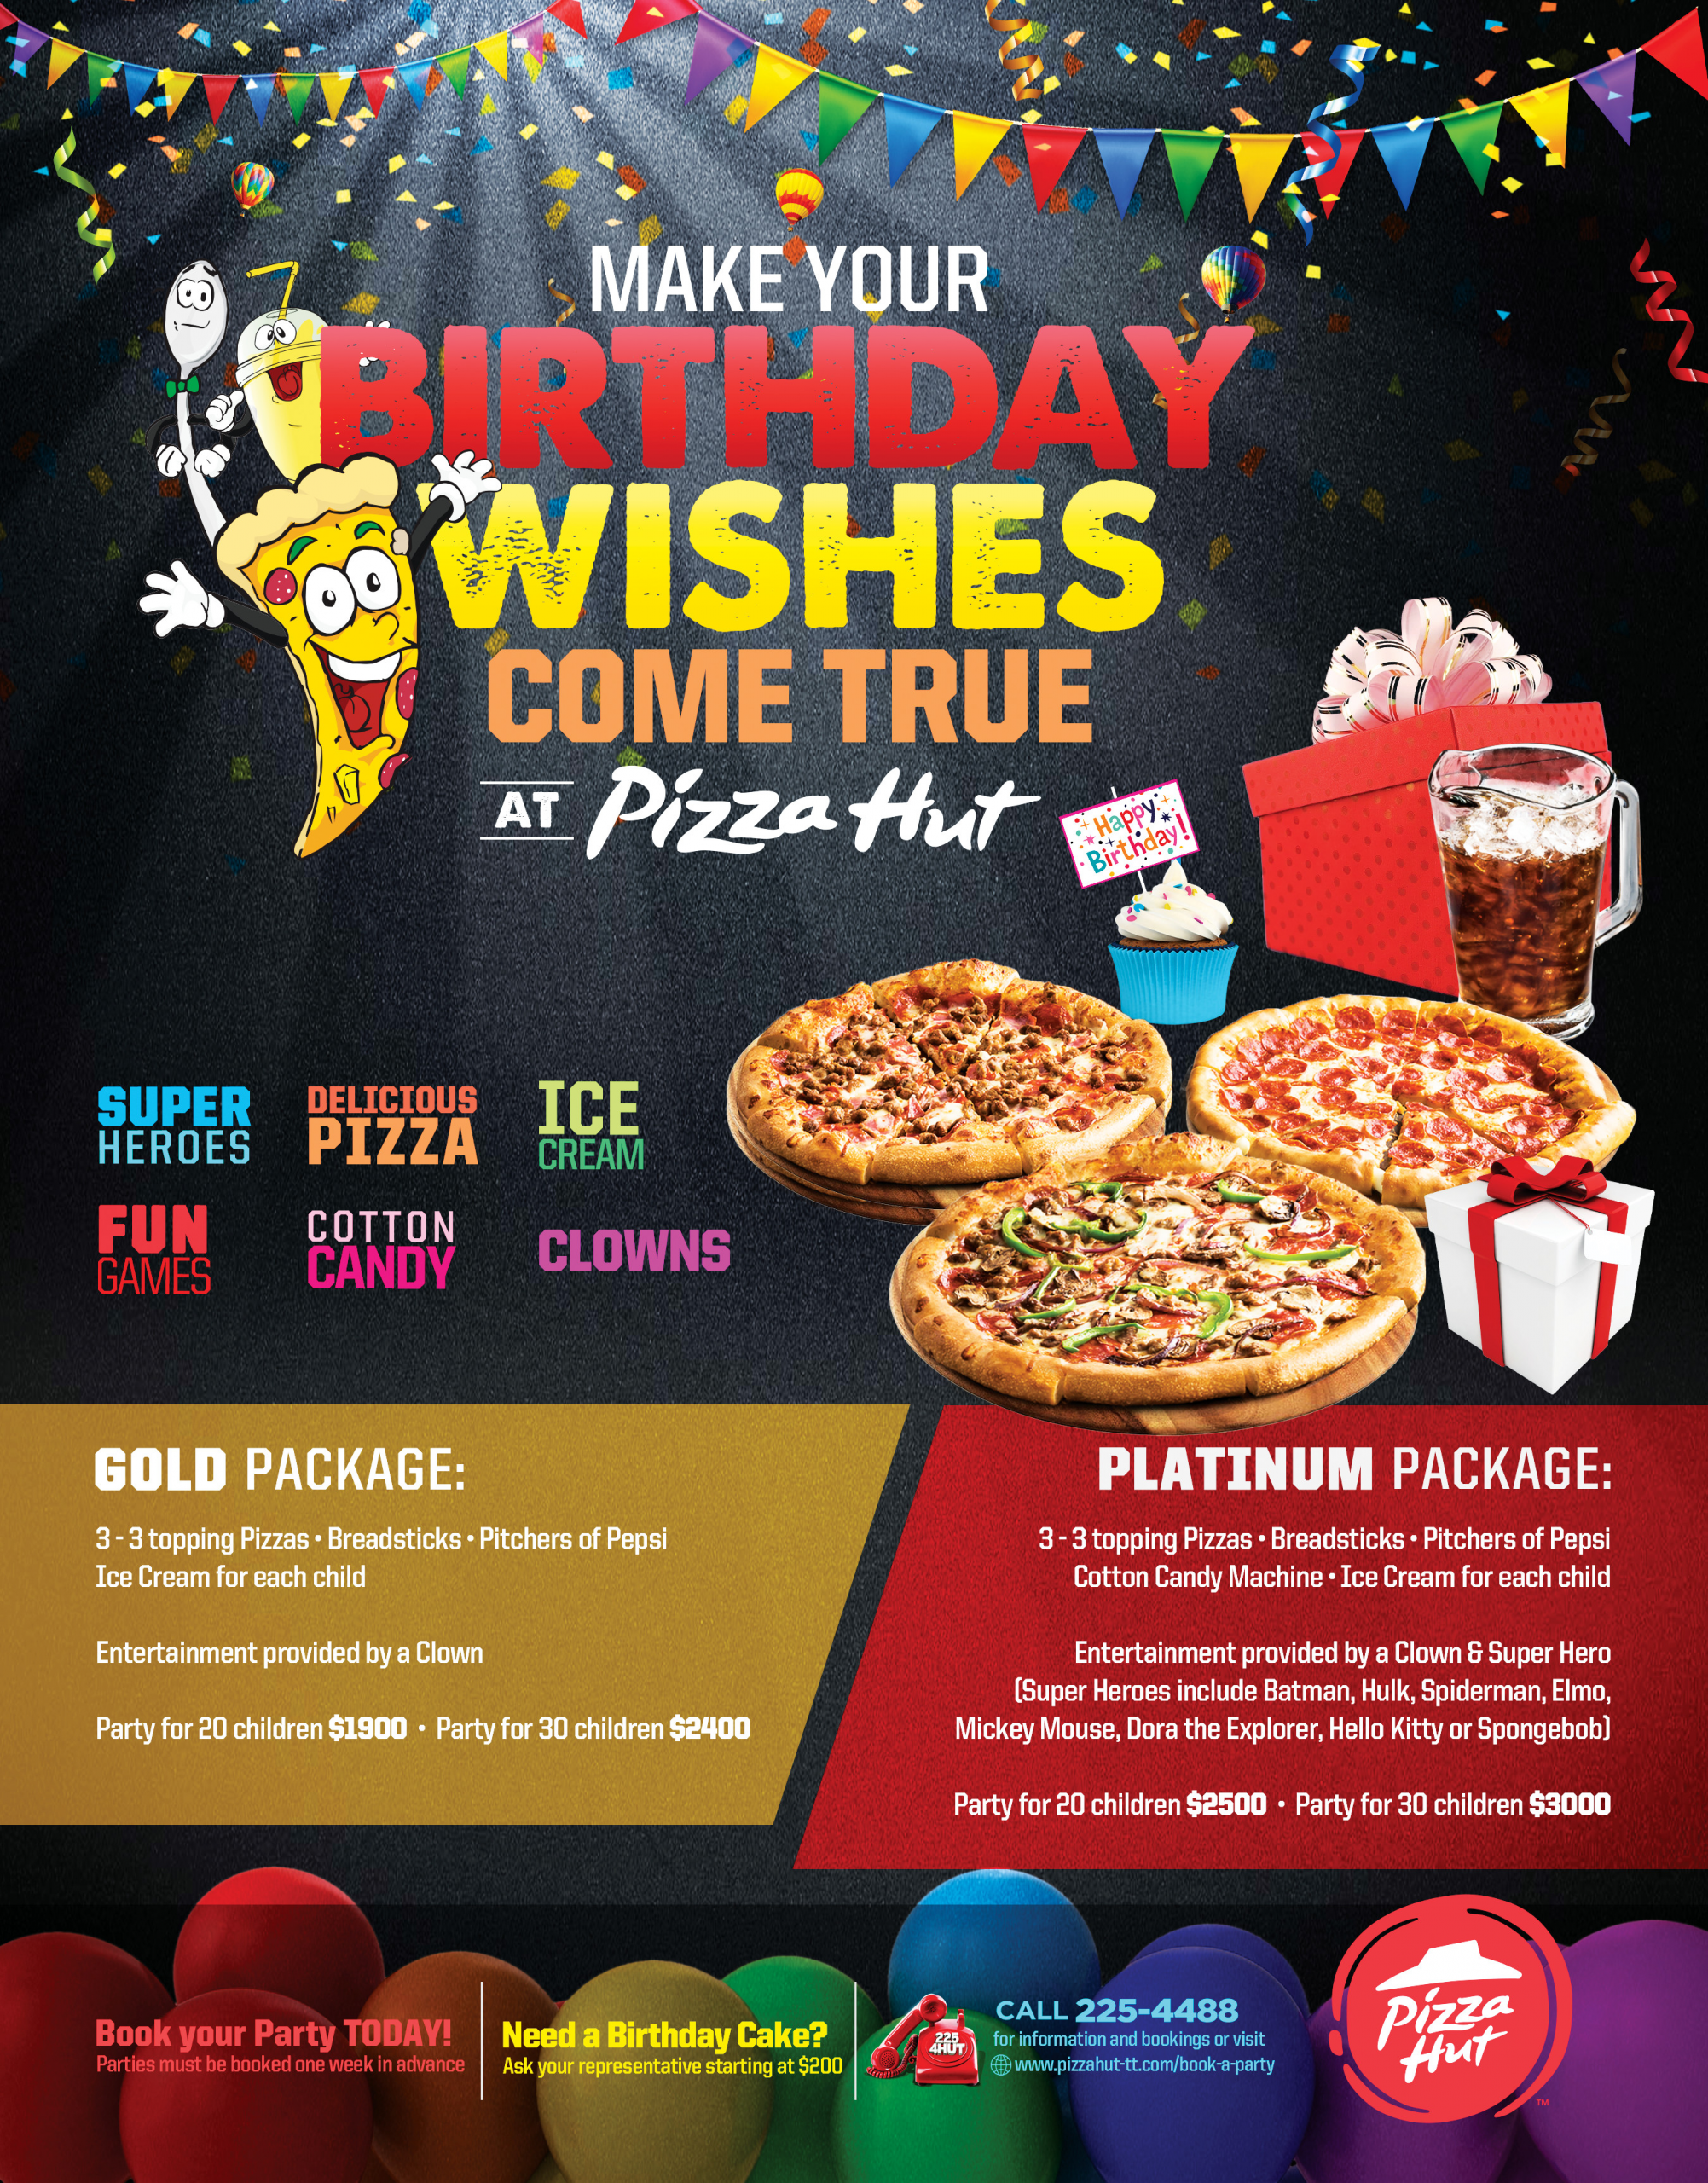 Pizza Hut Birthday Party Package
 Book a Party Pizza Hut Trinidad and Tobago